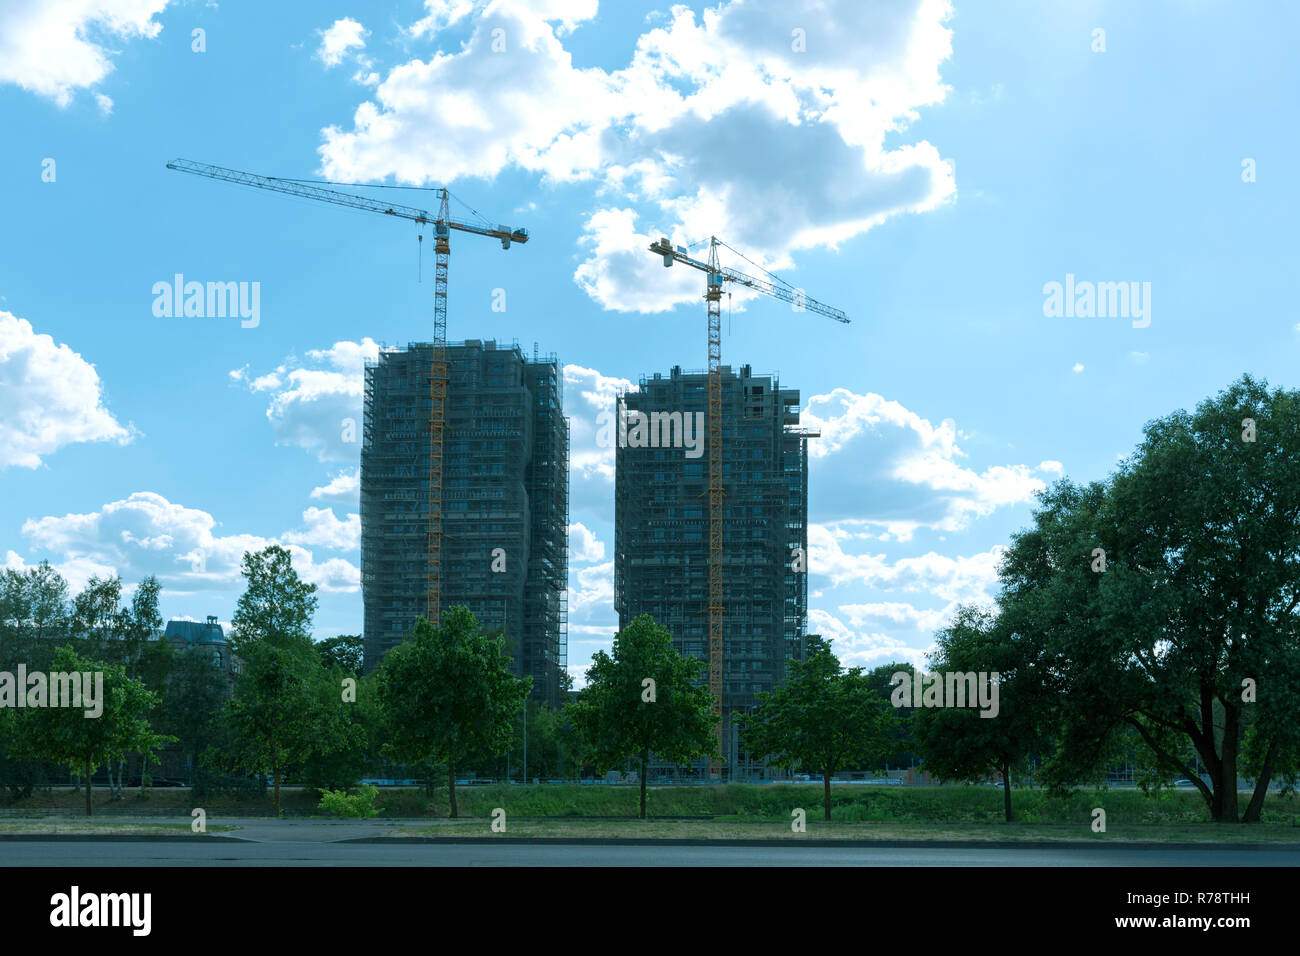 Modern architecture. Construction of skyscraper. Construction site with cranes Stock Photo